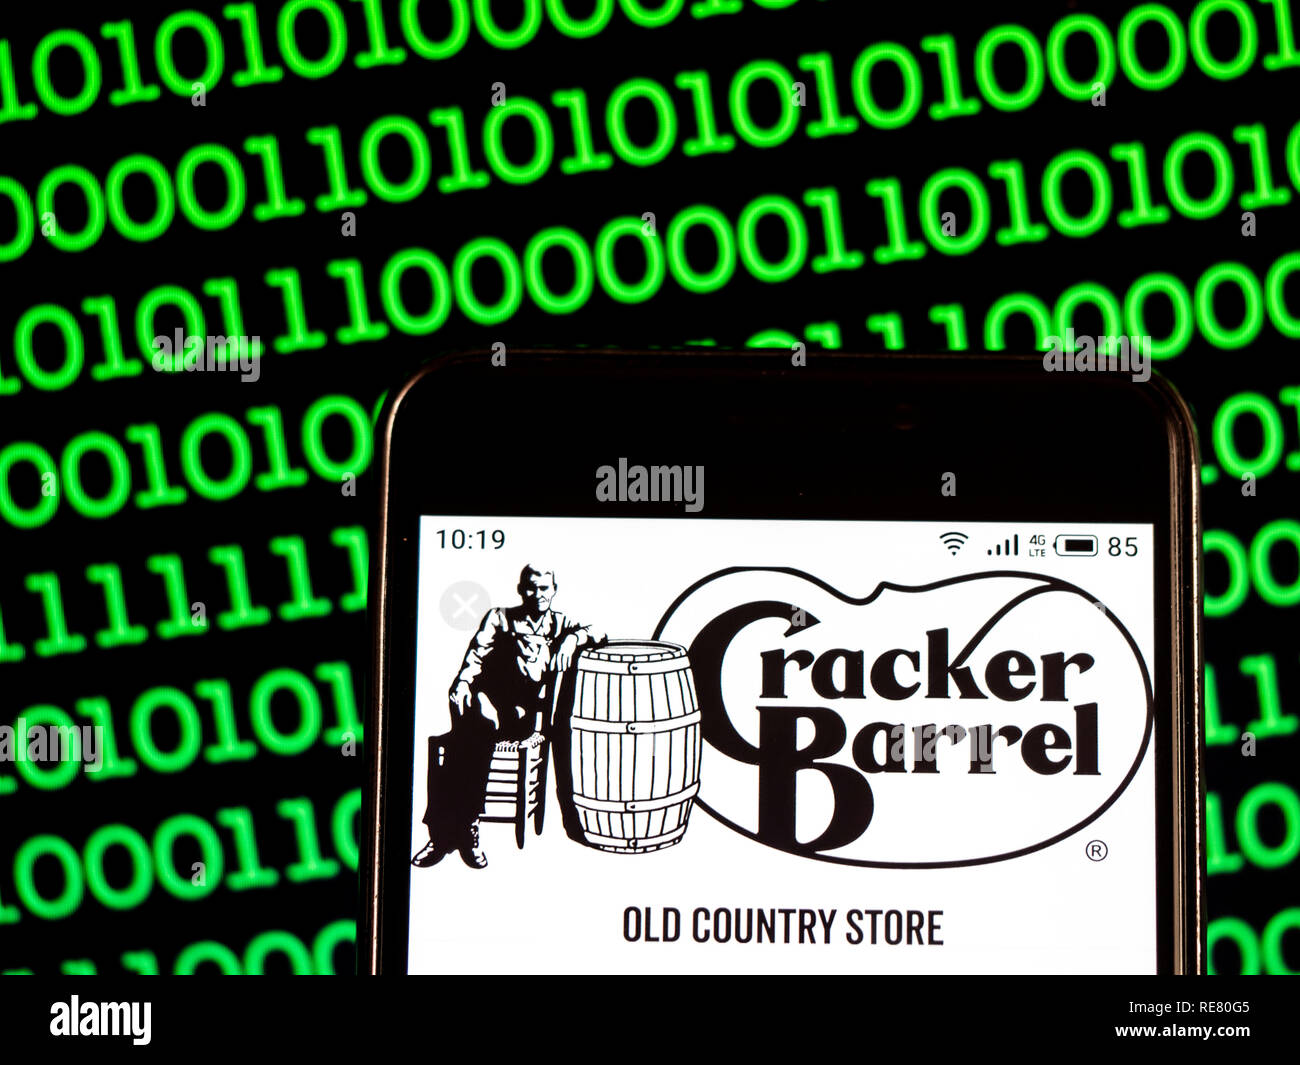 Cracker Barrel Old Country Store, Inc. logo seen displayed on smart phone Stock Photo